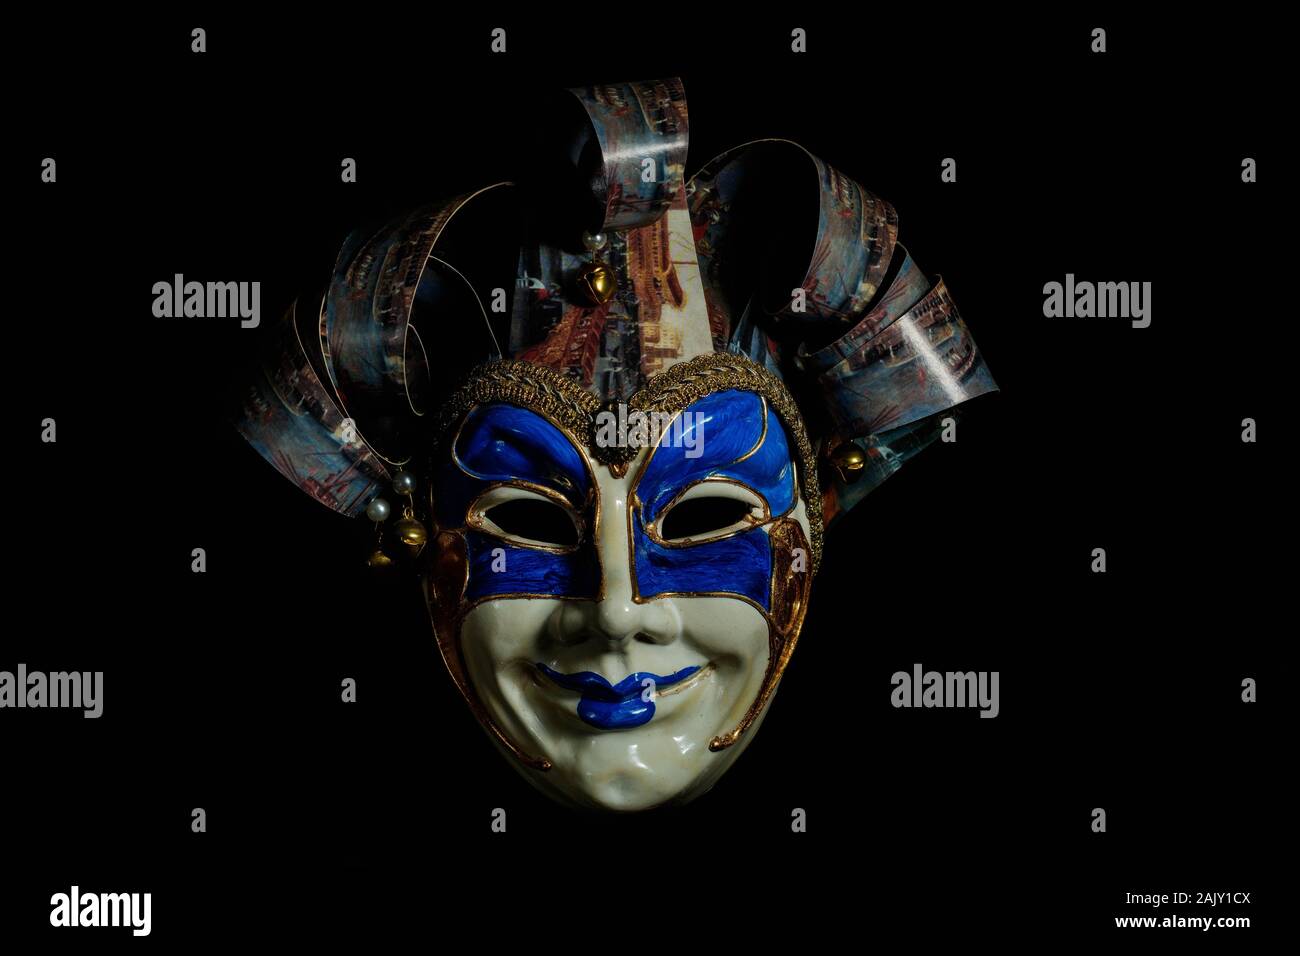 Venice / Italy - January 06 2020: Blue and white traditional Venetian mask on display in Venice Italy Stock Photo